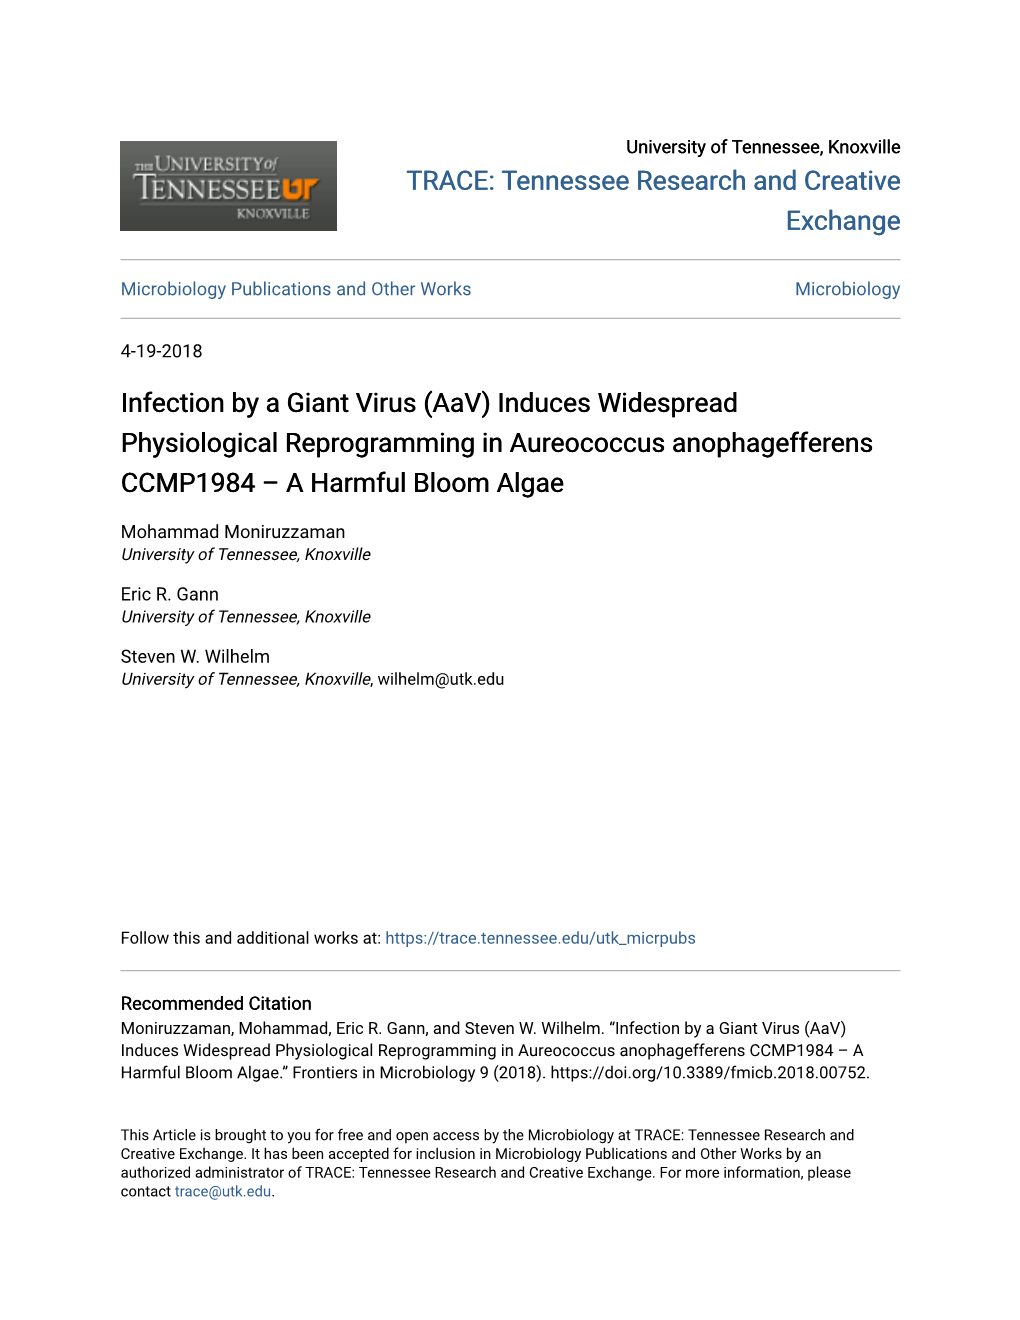 Infection by a Giant Virus (Aav) Induces Widespread Physiological Reprogramming in Aureococcus Anophagefferens CCMP1984 – a Harmful Bloom Algae